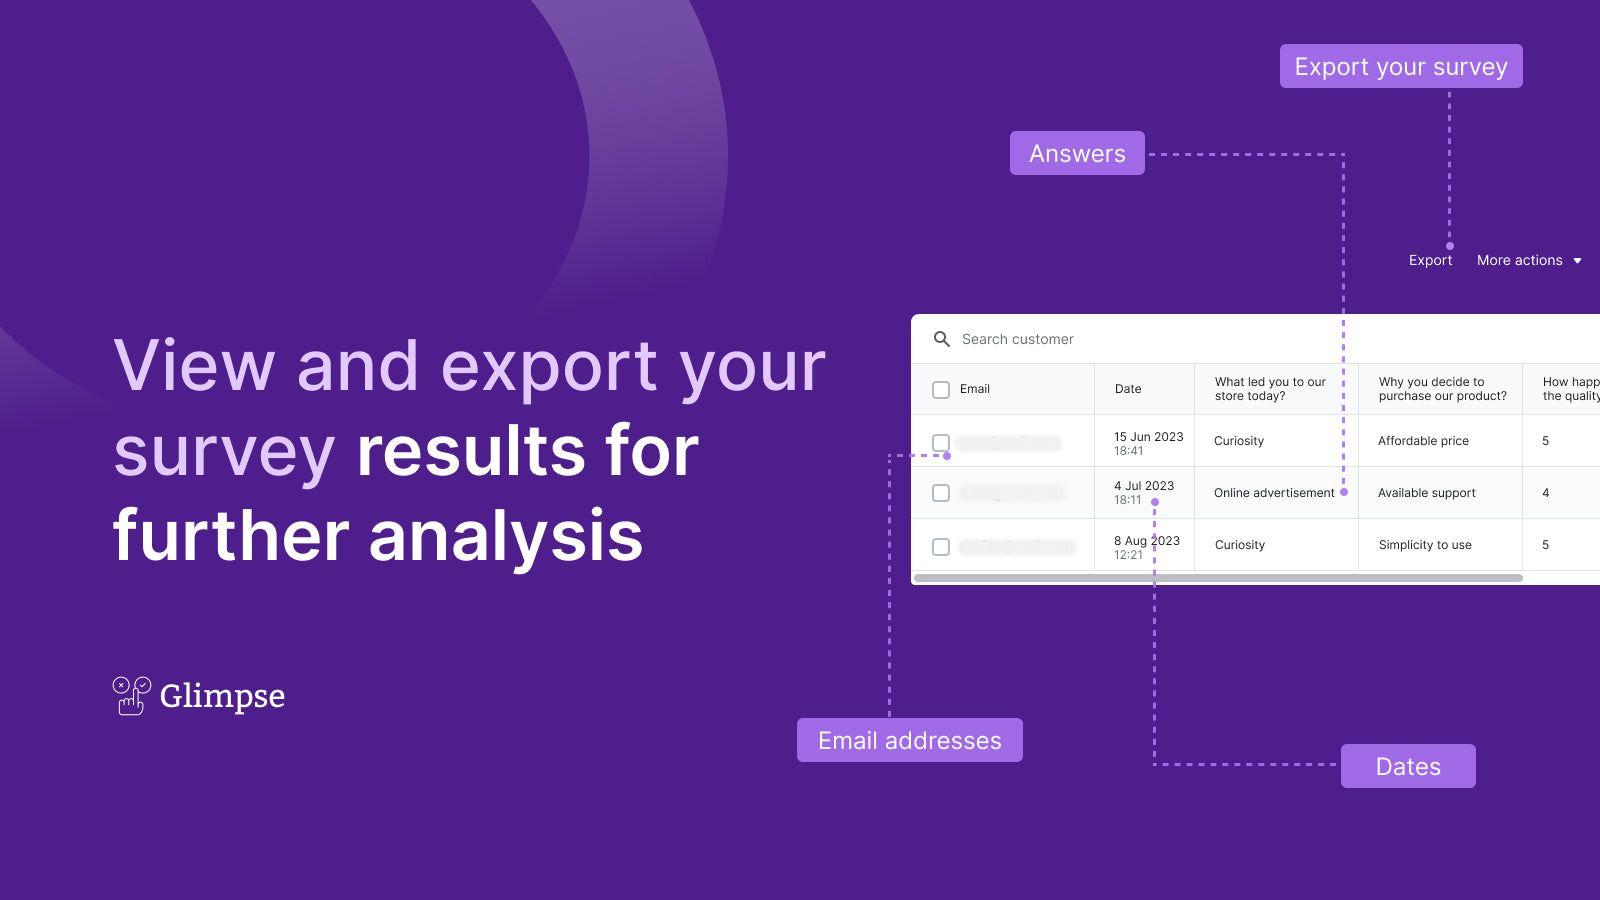 View and export your survey results for further analysis